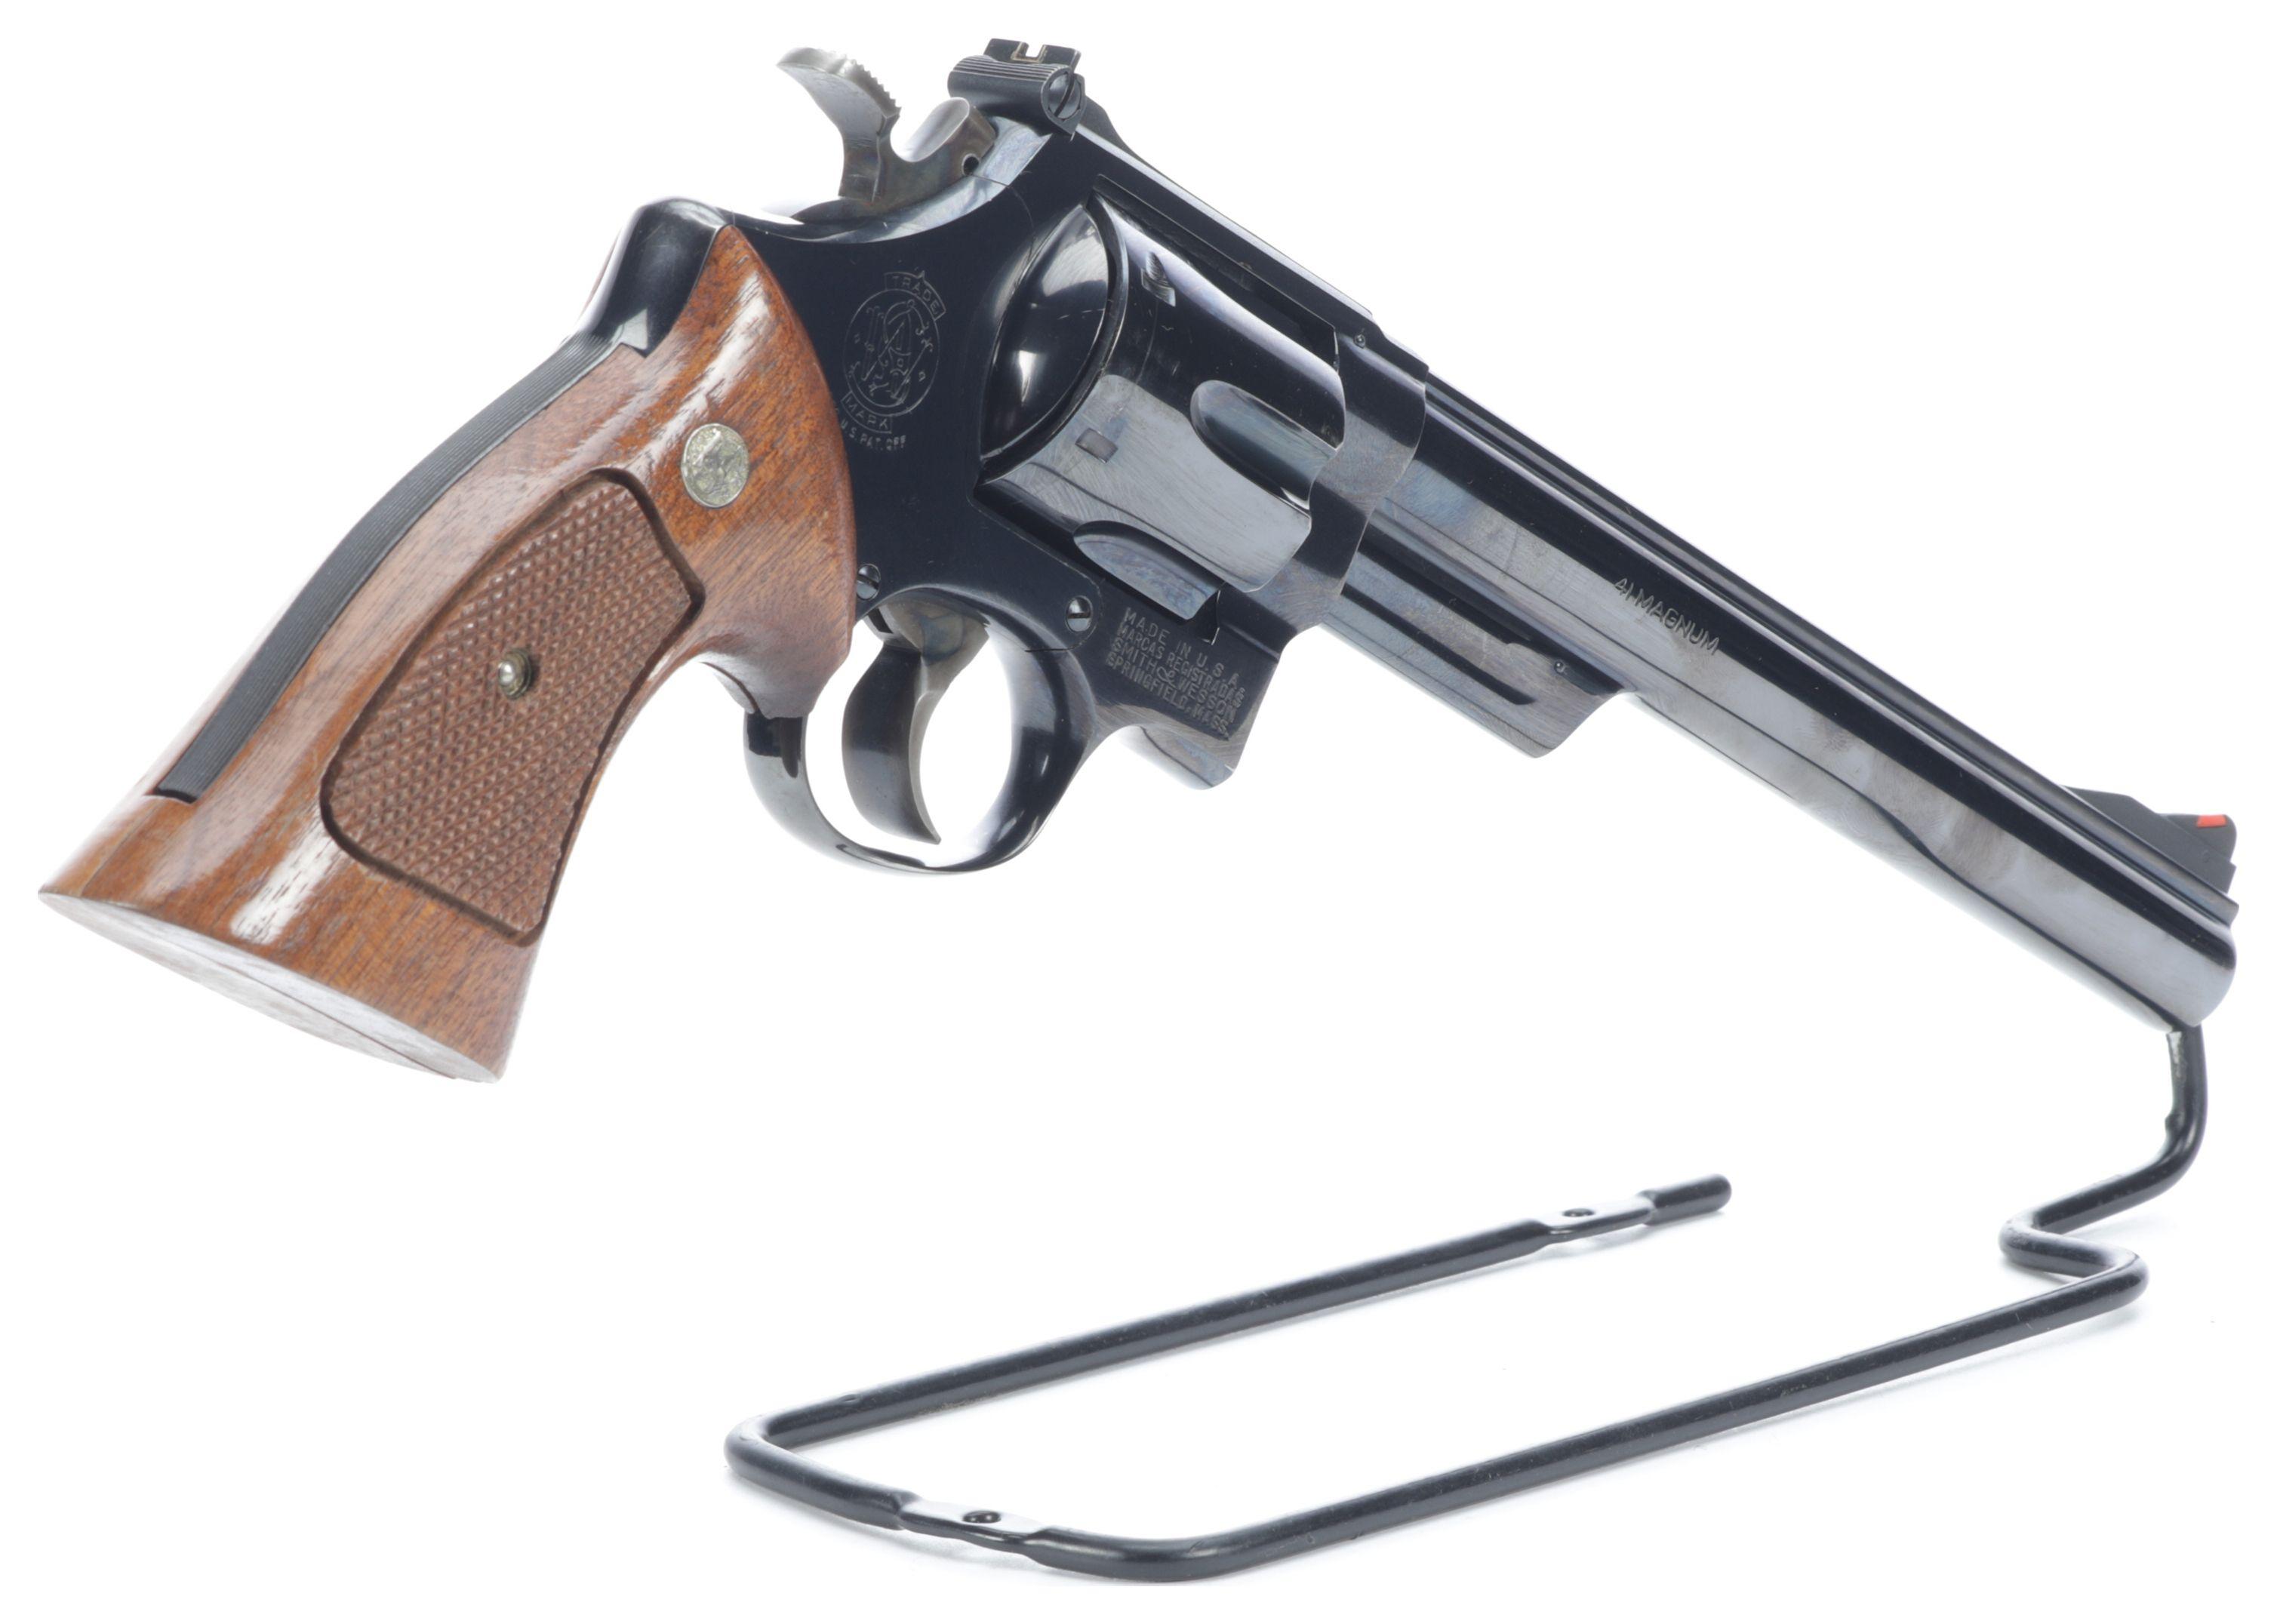 Smith & Wesson Model 57 Double Action Revolver with Box